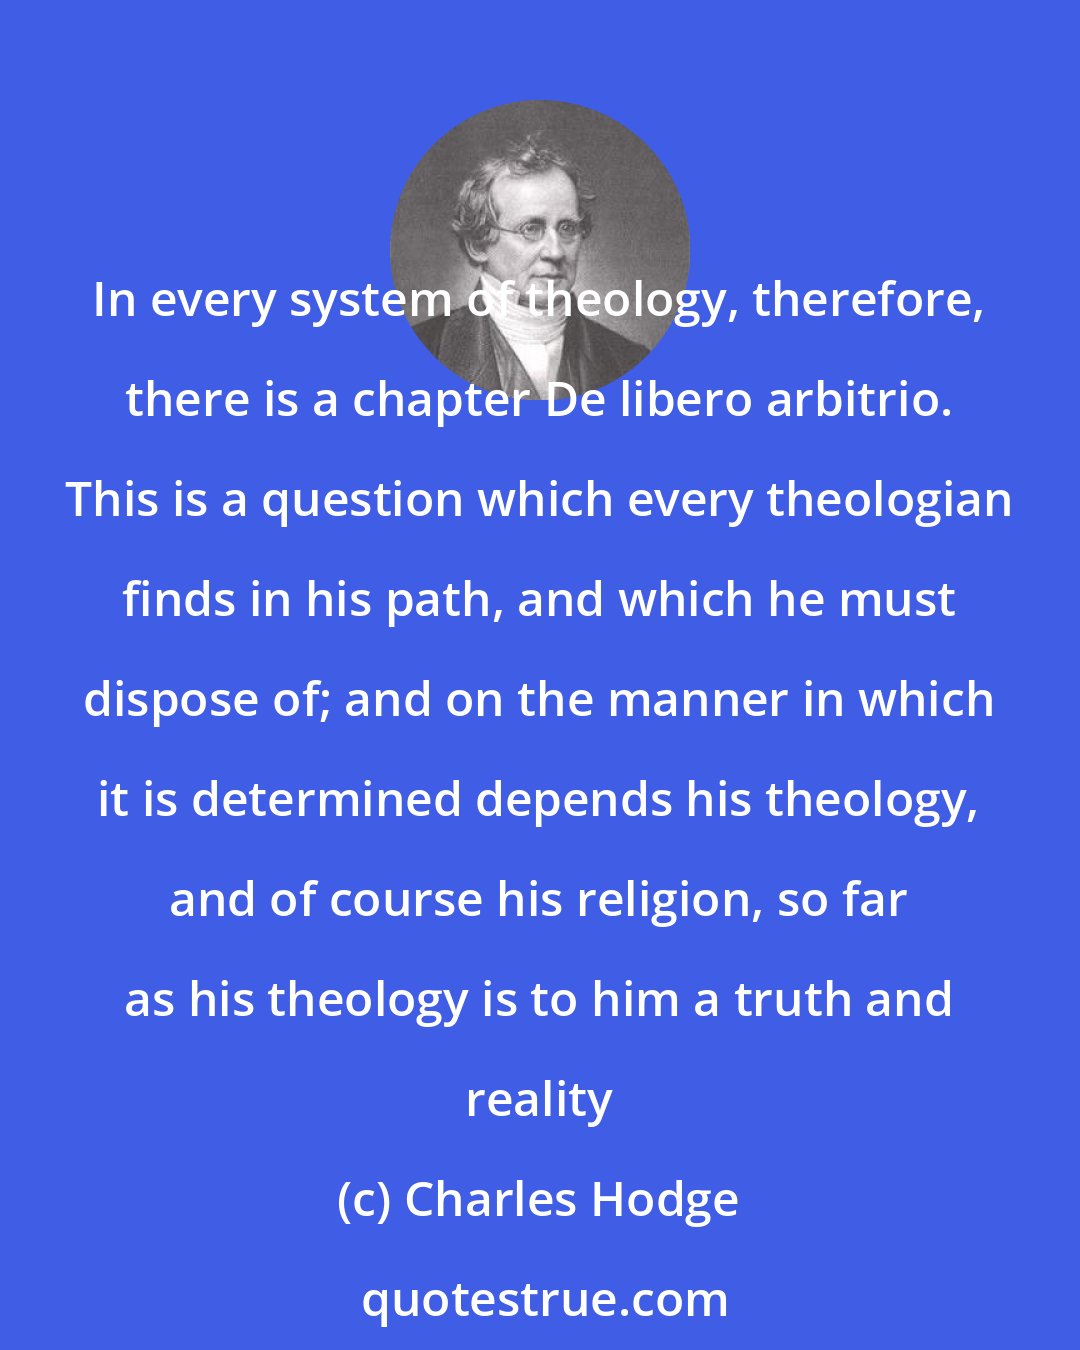 Charles Hodge: In every system of theology, therefore, there is a chapter De libero arbitrio. This is a question which every theologian finds in his path, and which he must dispose of; and on the manner in which it is determined depends his theology, and of course his religion, so far as his theology is to him a truth and reality